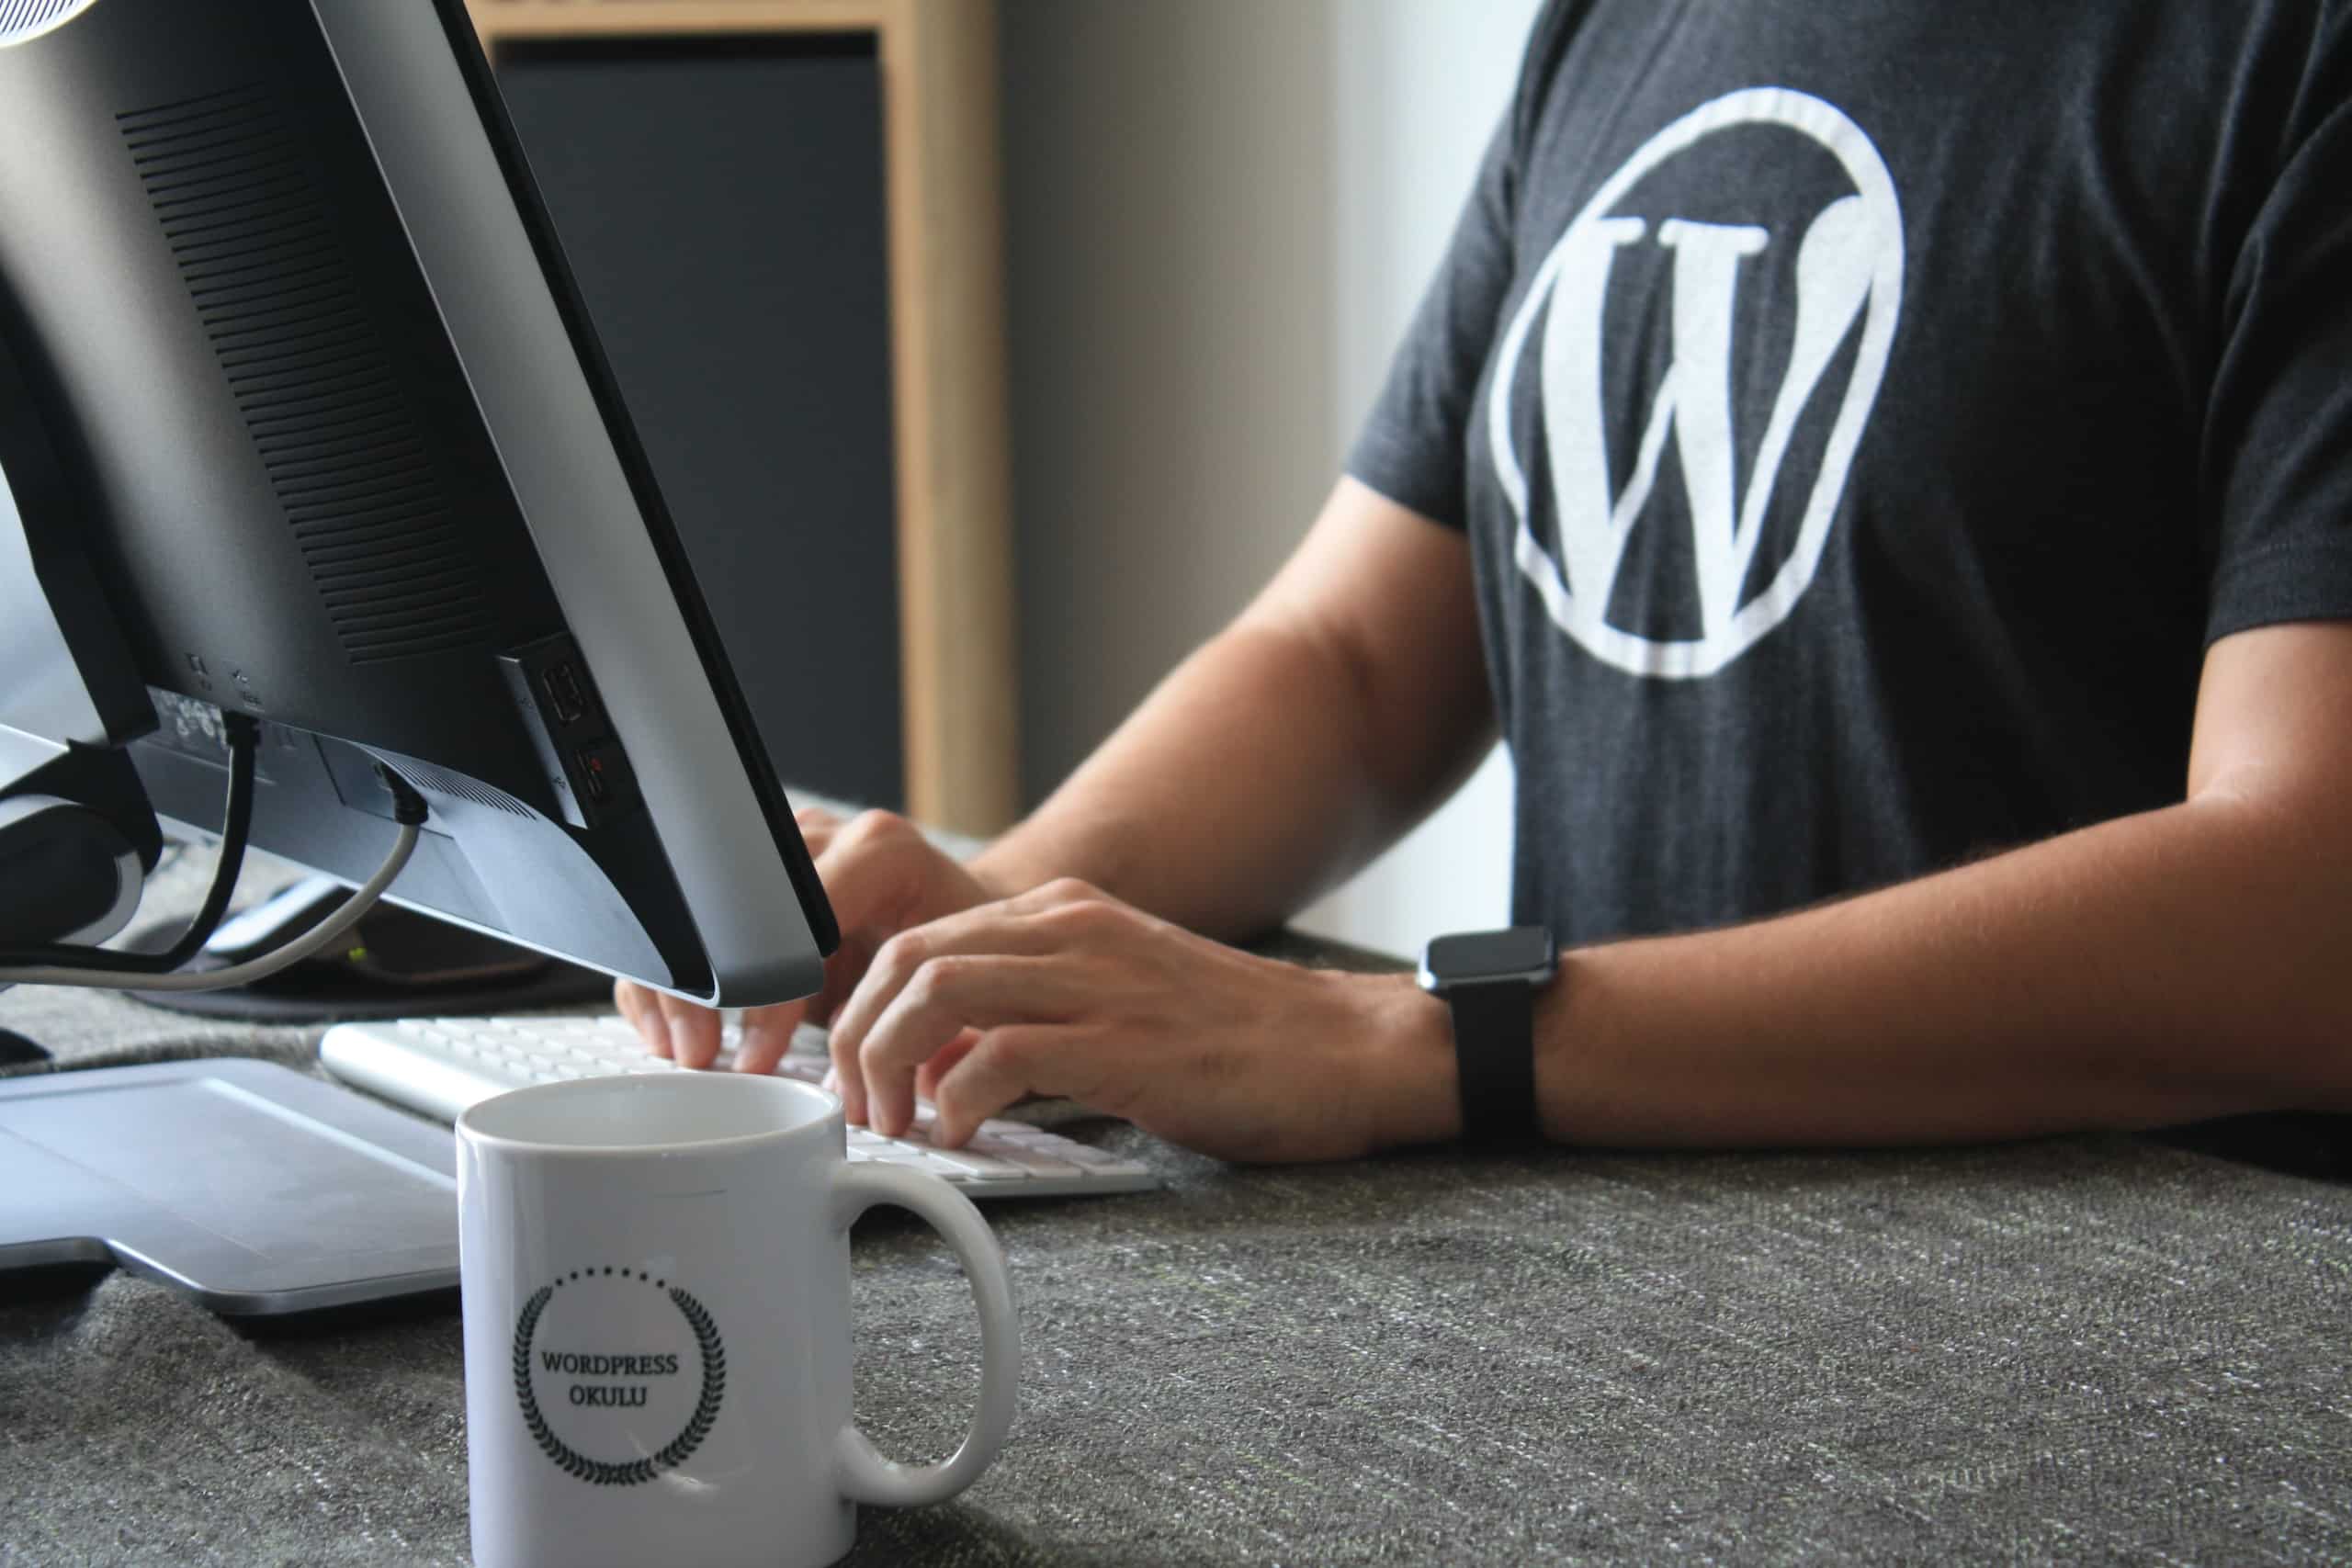 Featured image for “WordPress.org vs. WordPress.com: Demystifying the Difference”